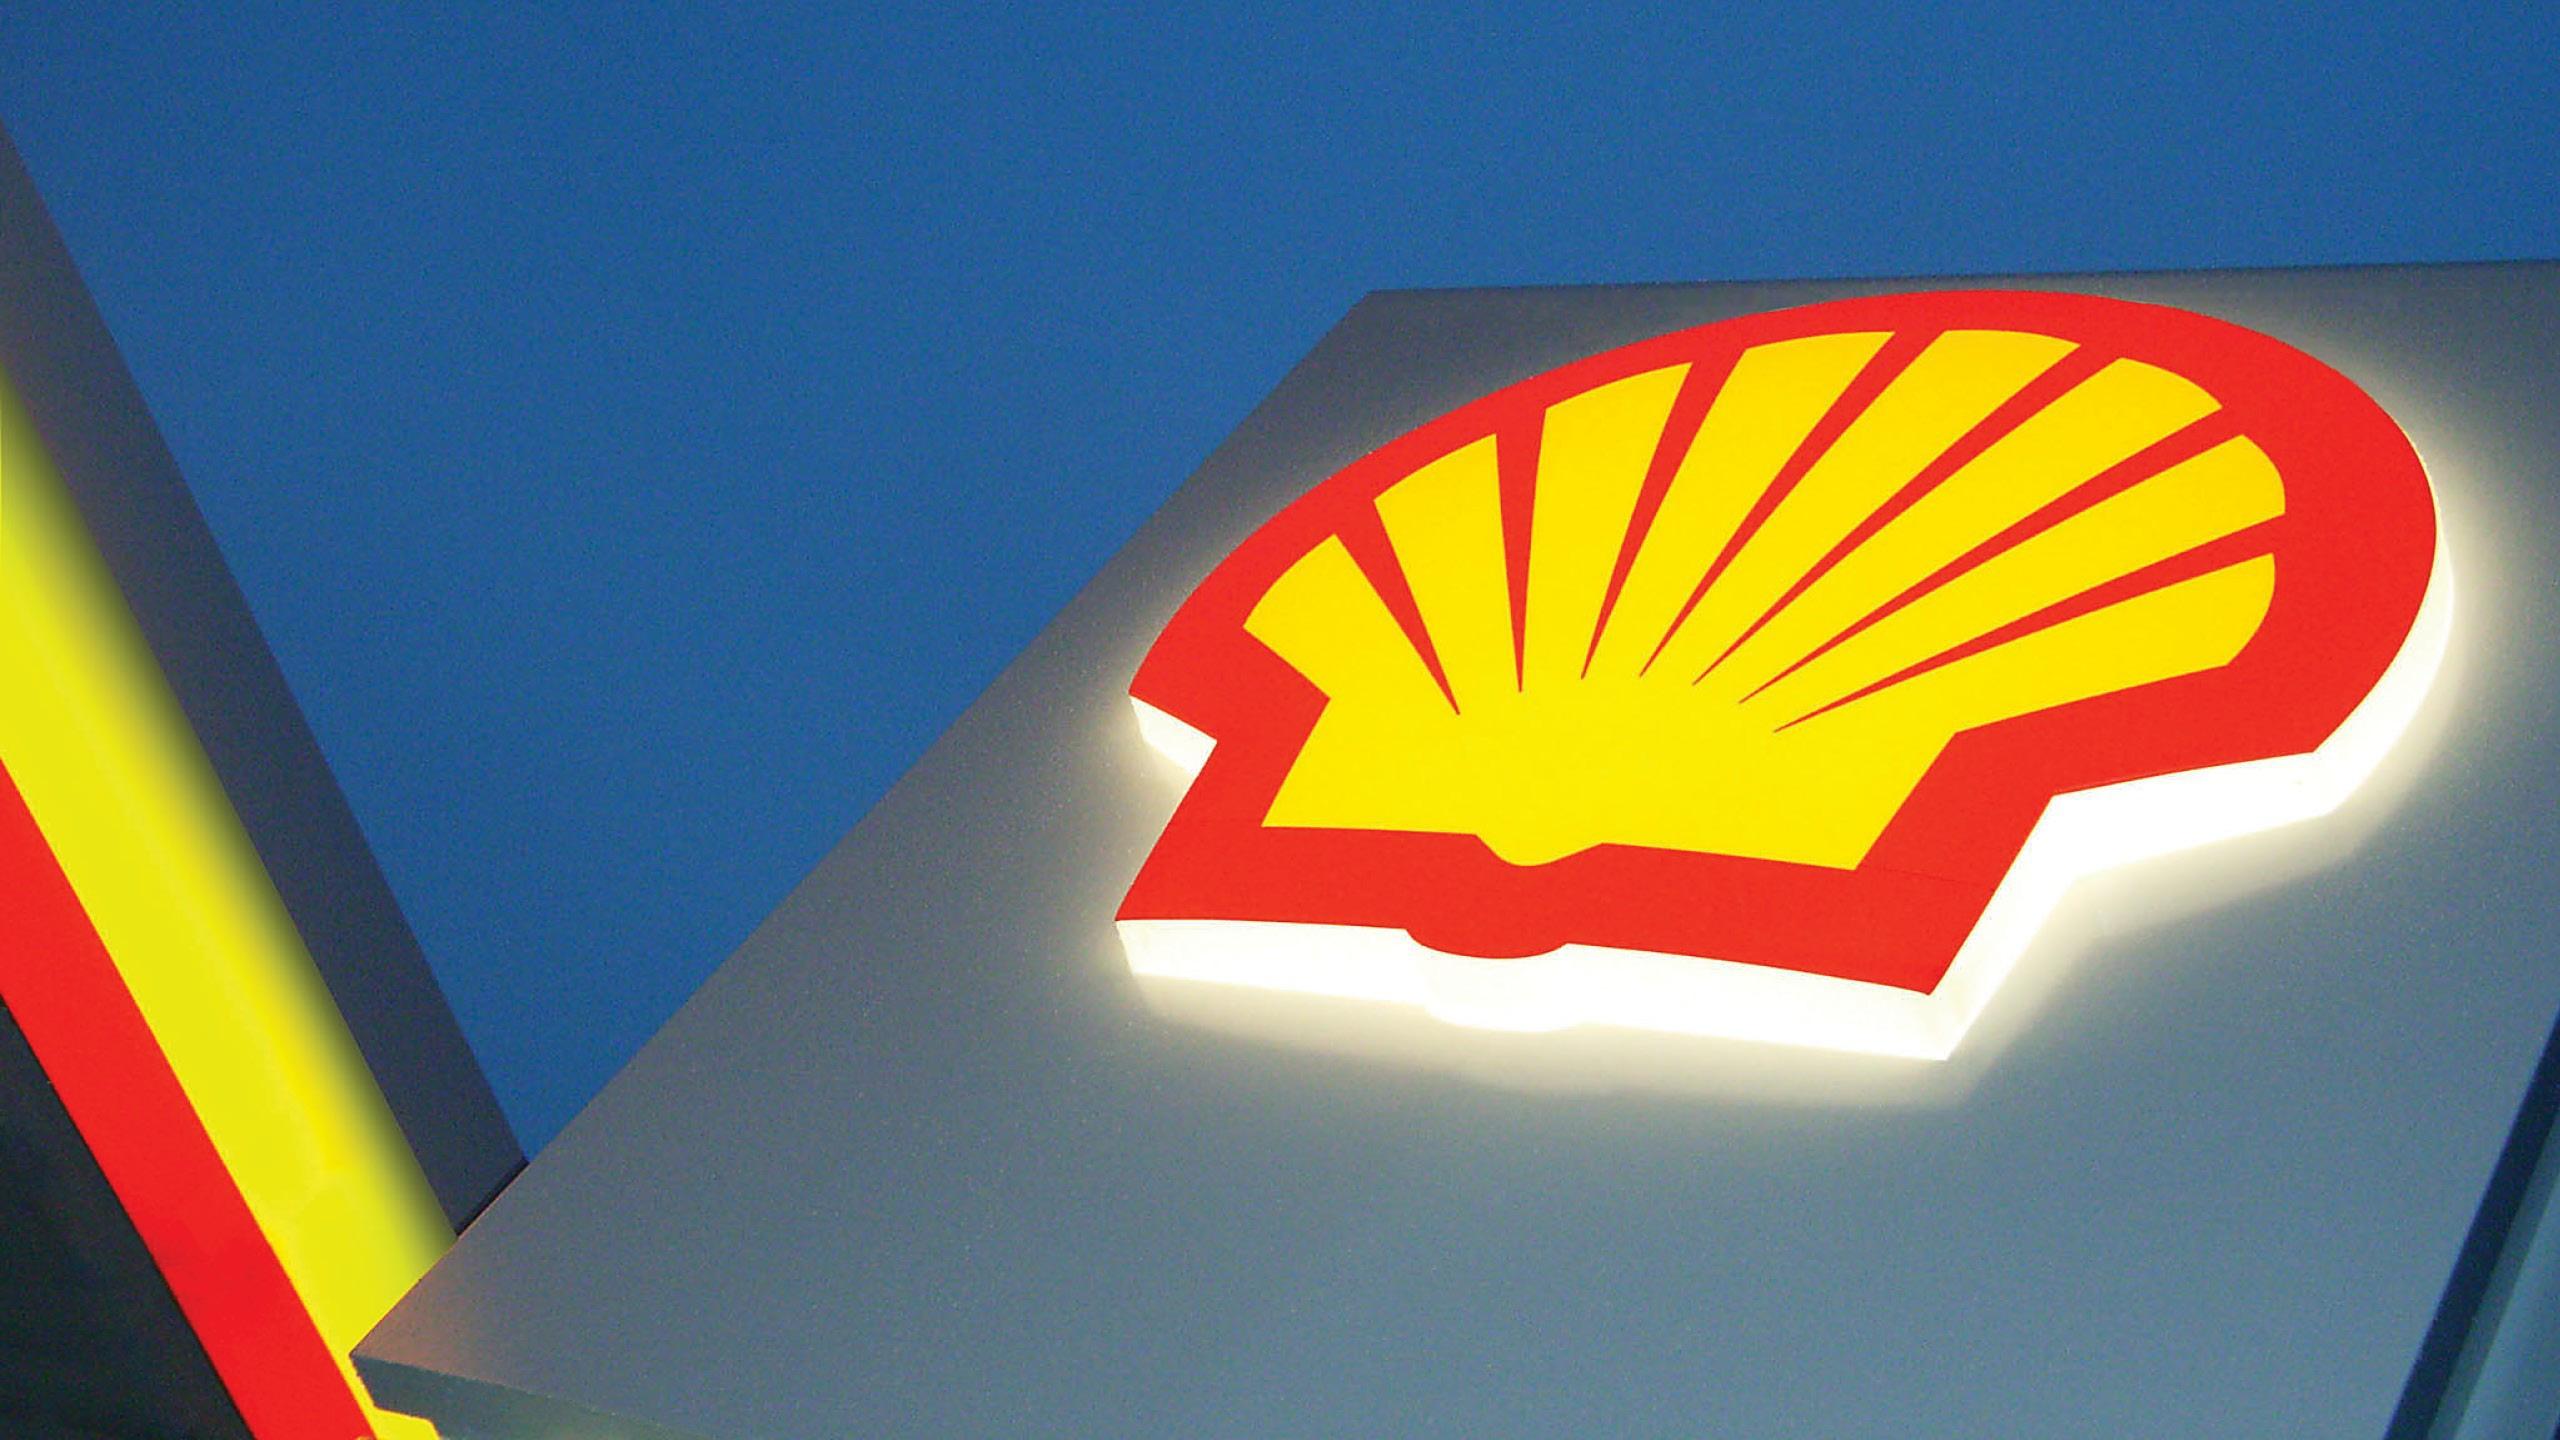 Royal Dutch Shell Wallpapers Image Photos Pictures Backgrounds